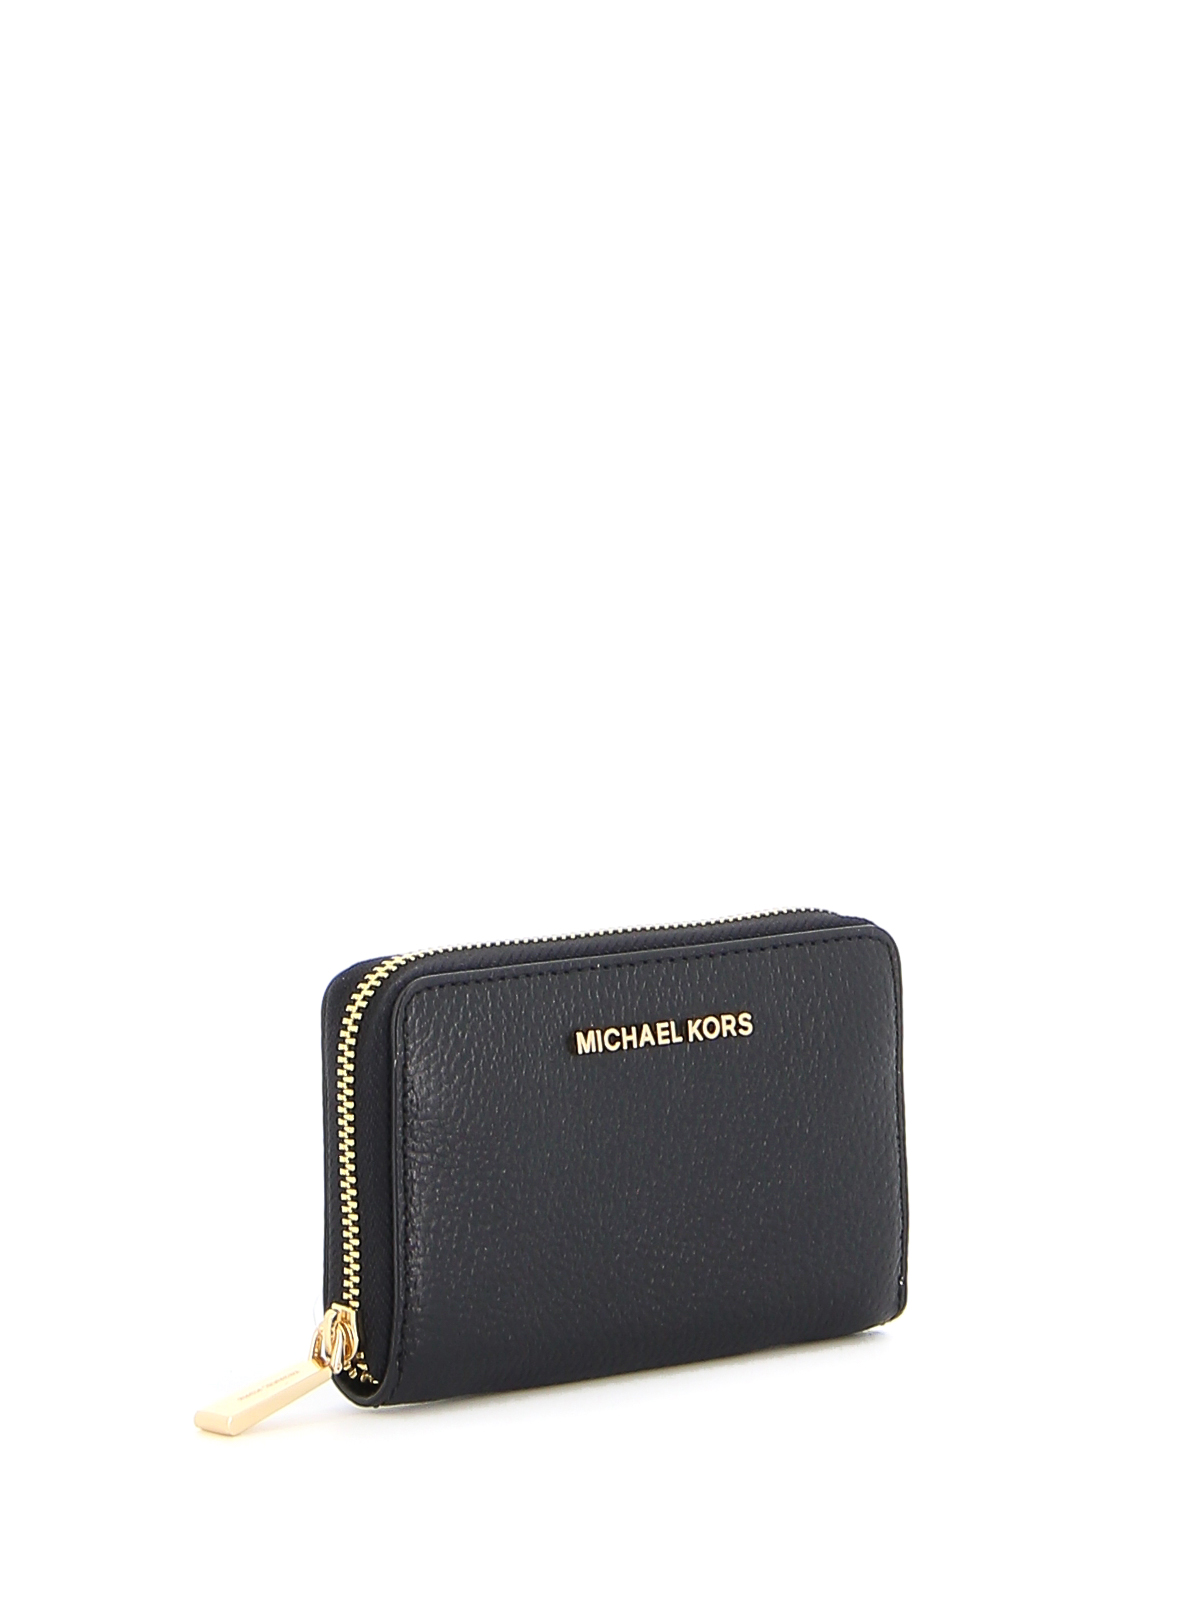 Michael Kors small logo and leather wallet Womens Fashion Bags  Wallets  Purses  Pouches on Carousell